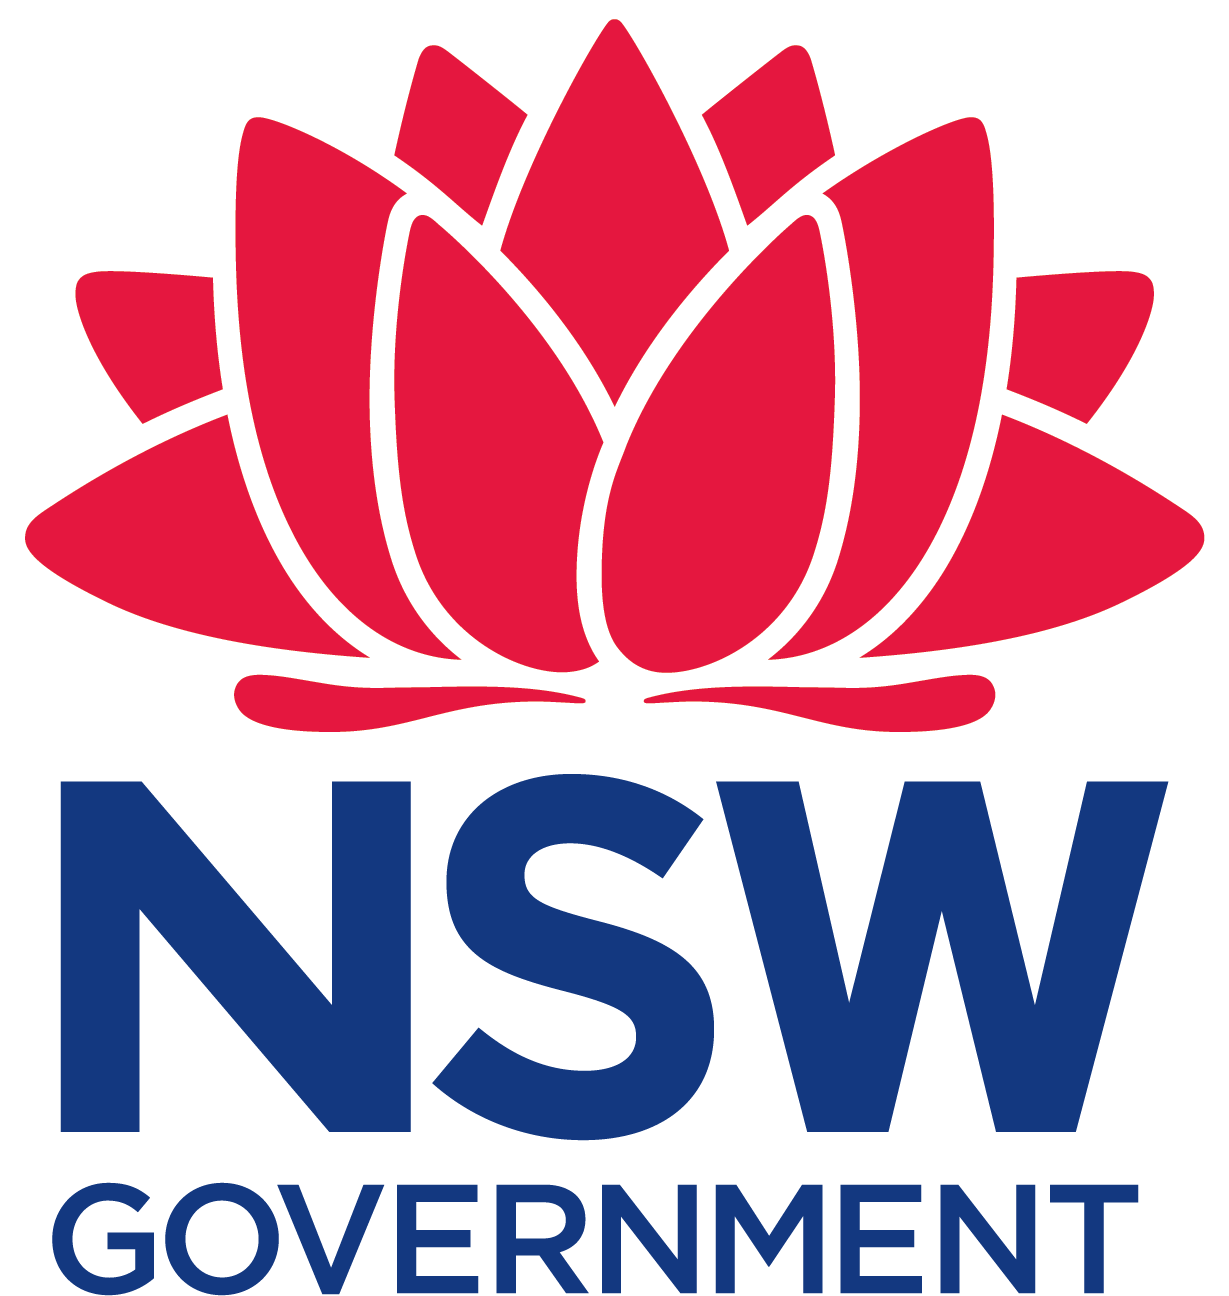 NSW Government stacked logo